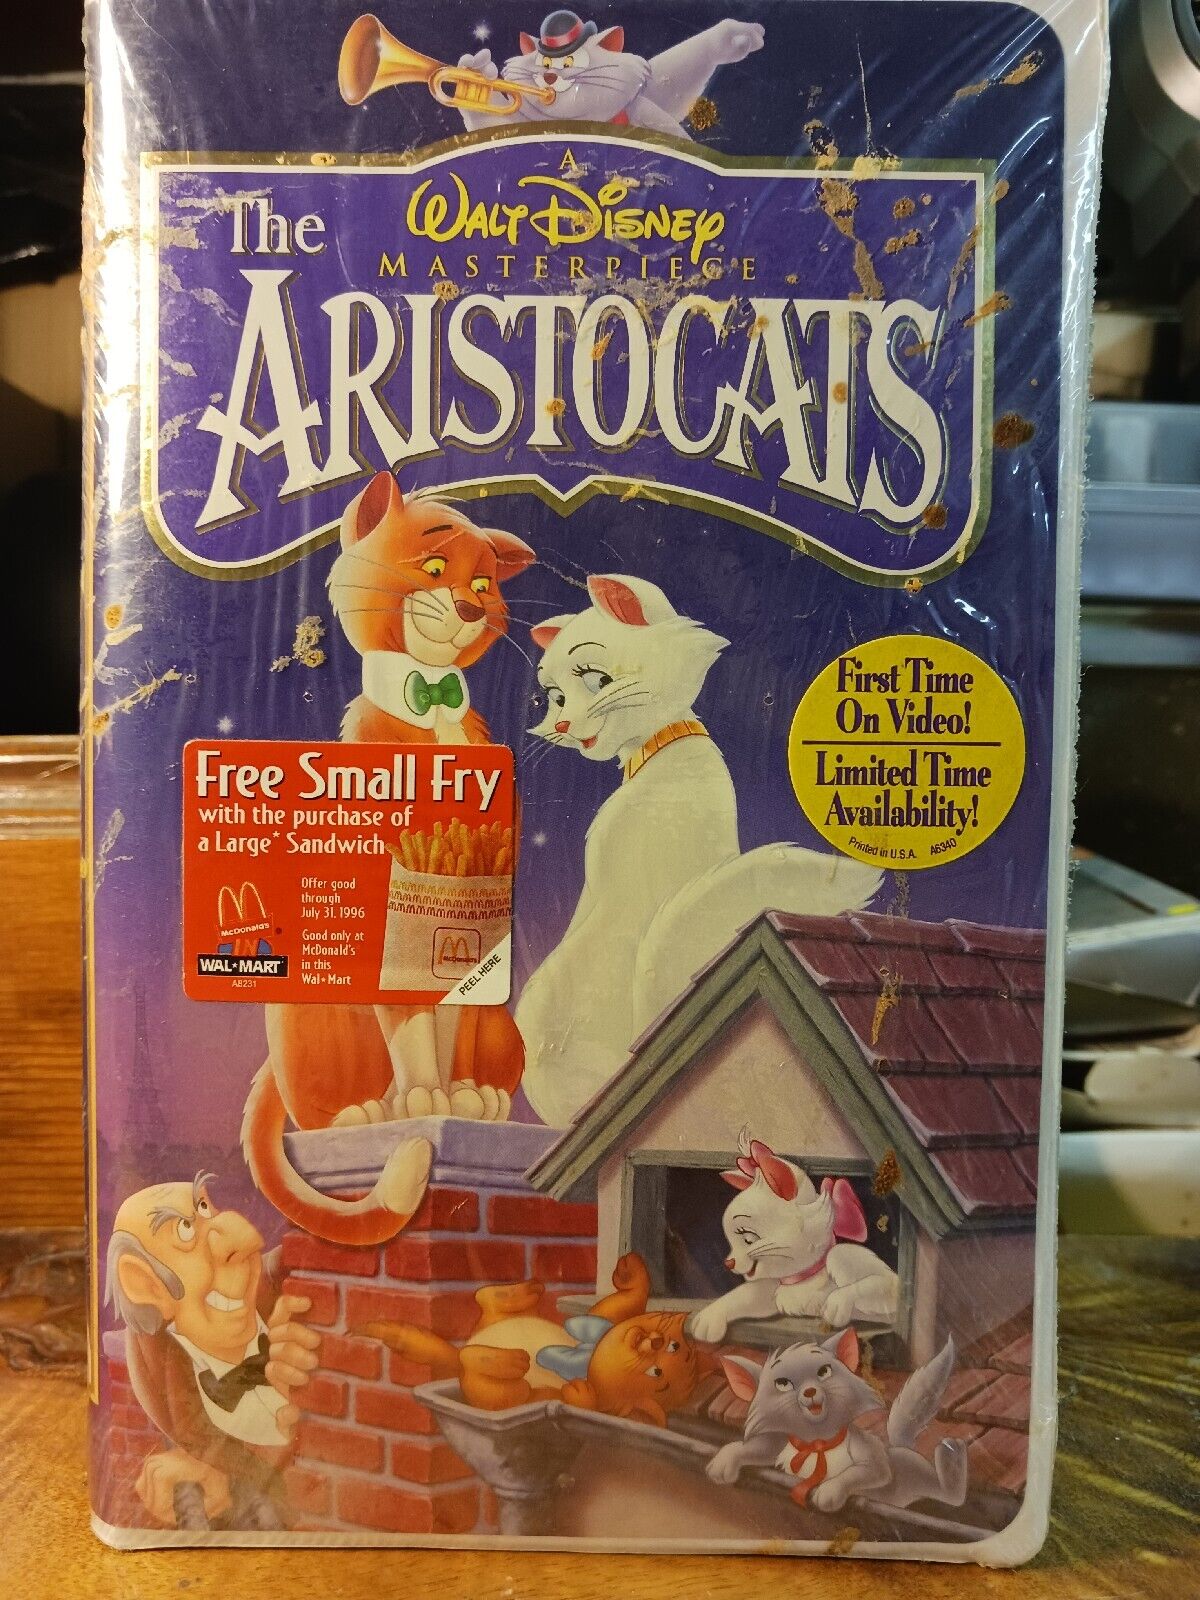 Disney's Masterpiece The Aristocats Limited Edition Vaulted